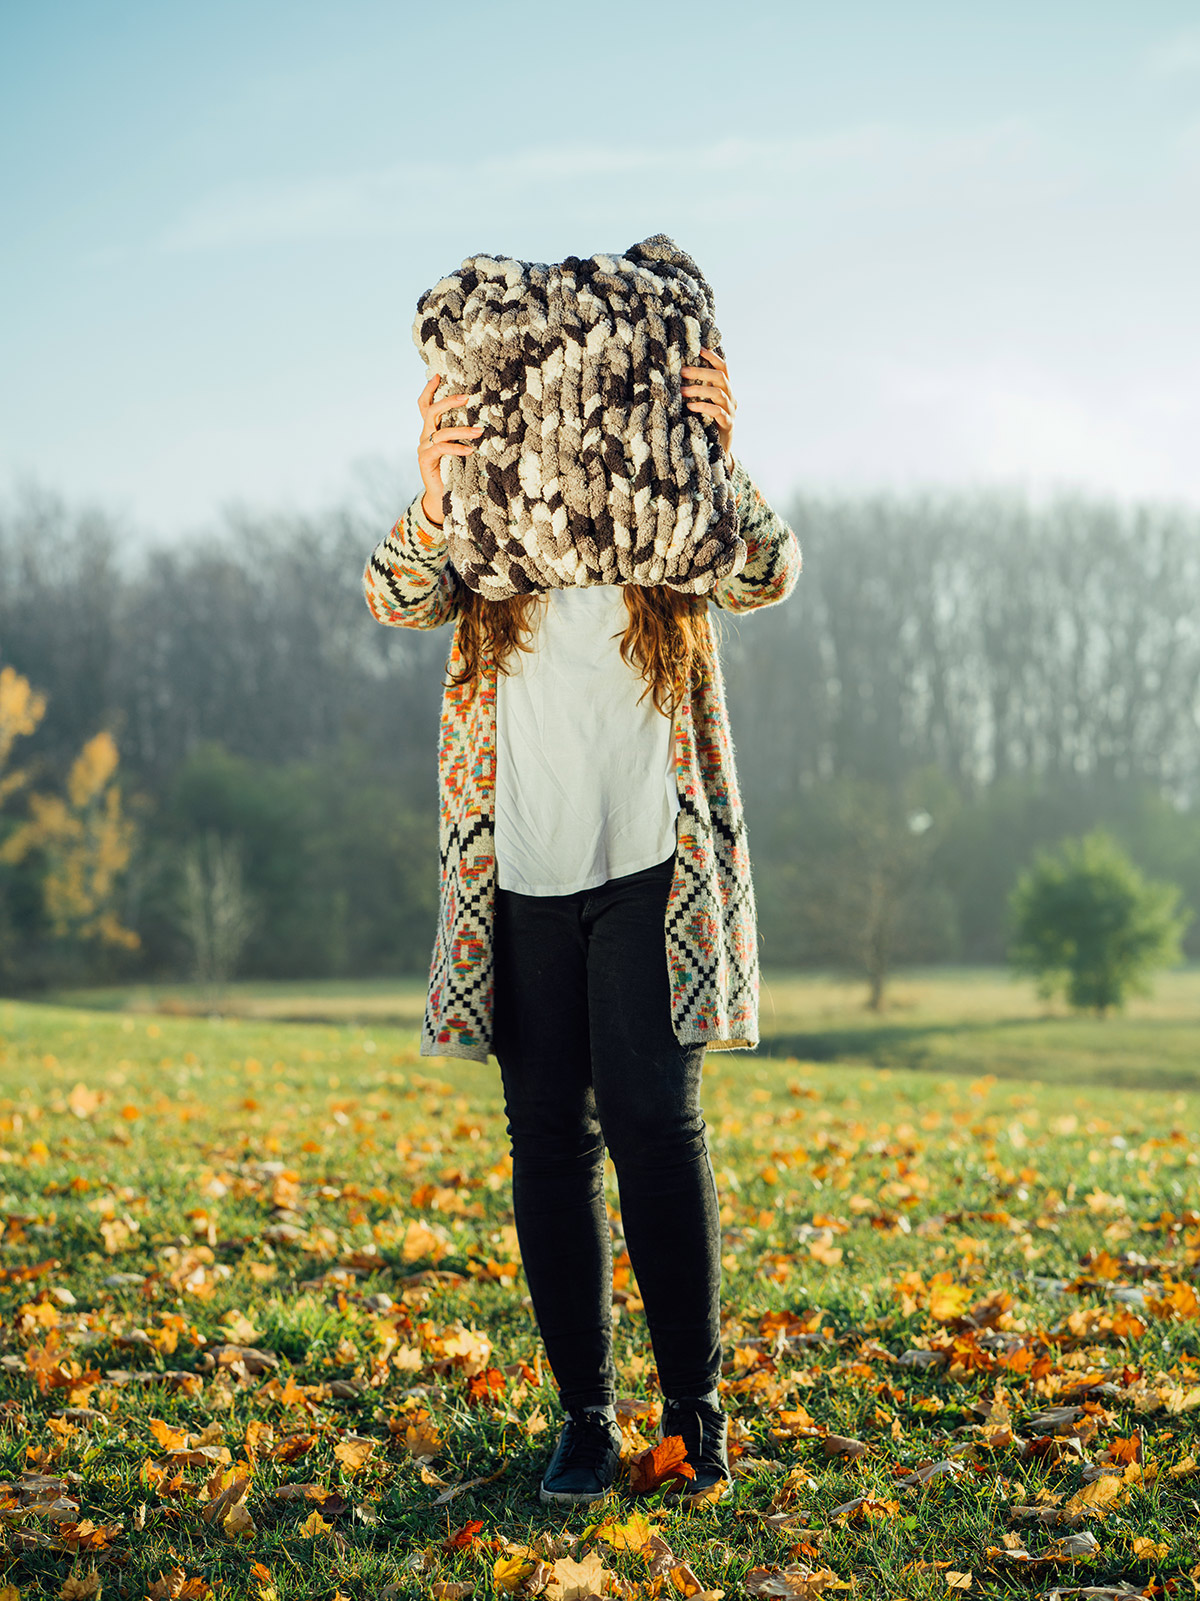 Photo of a teenage girl wearing a long sweater and black pants. She is standing in a field with colourful fallen leaves on the ground. She is holding a large crocheted pillow in front of her face.